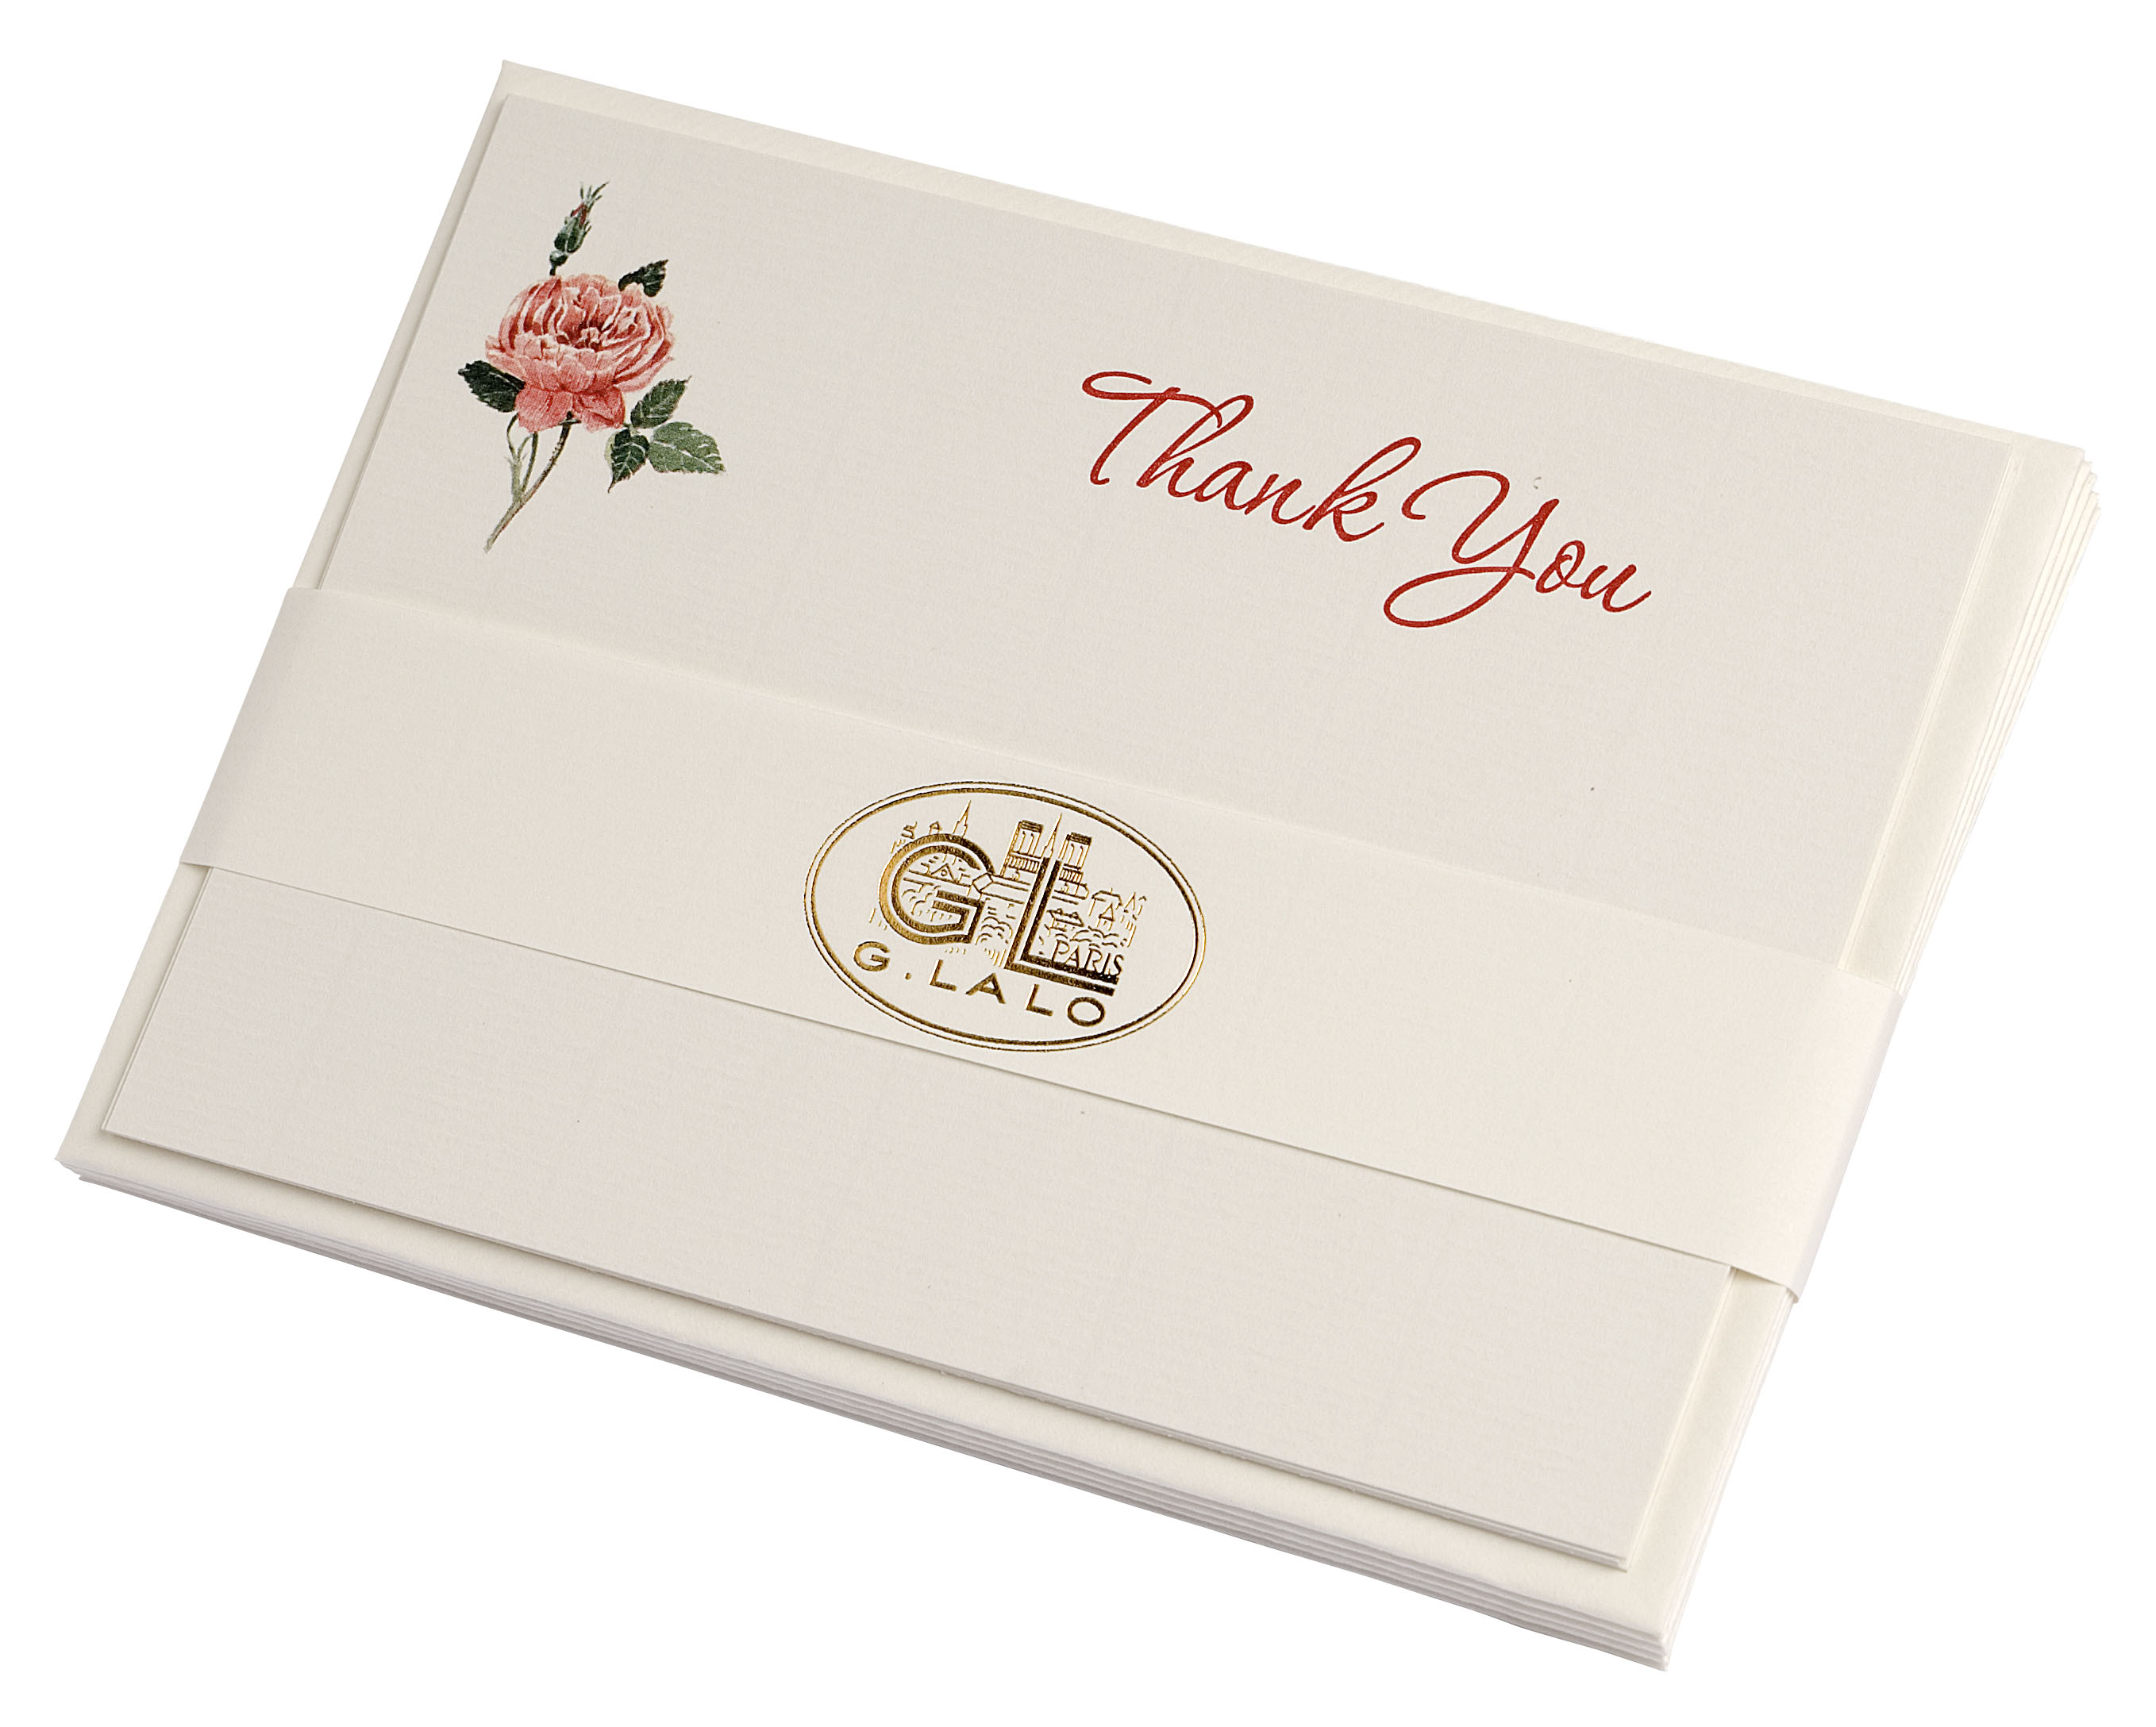 Floral Watercolor Thank You Notes - Show Special Net Price - $1.50